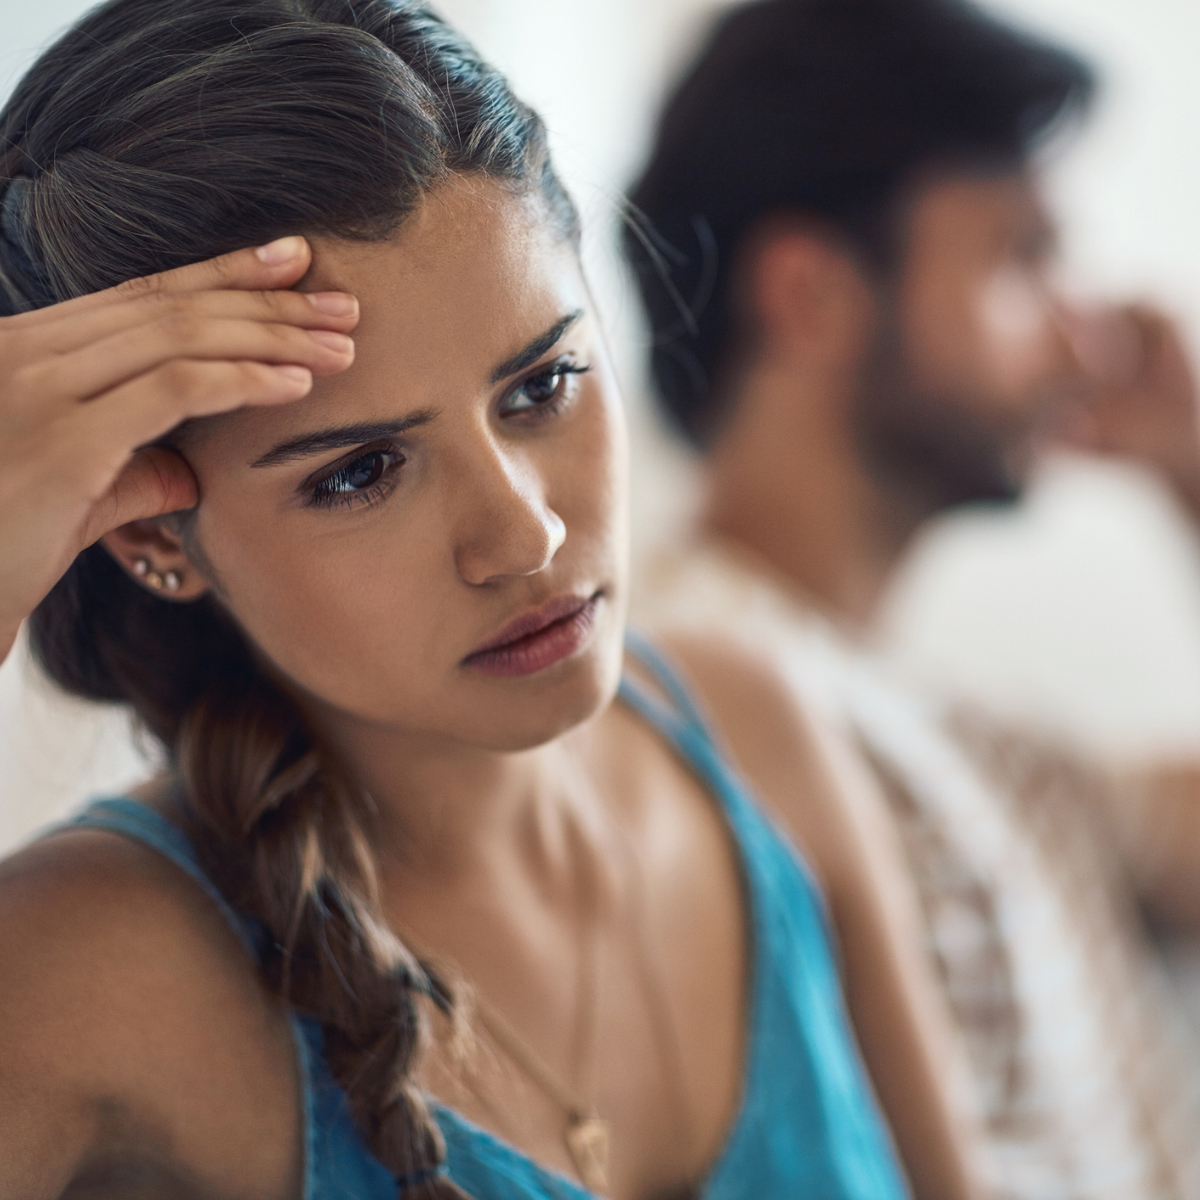 Relationship Advice: 7 Ways to deal with a moody partner 